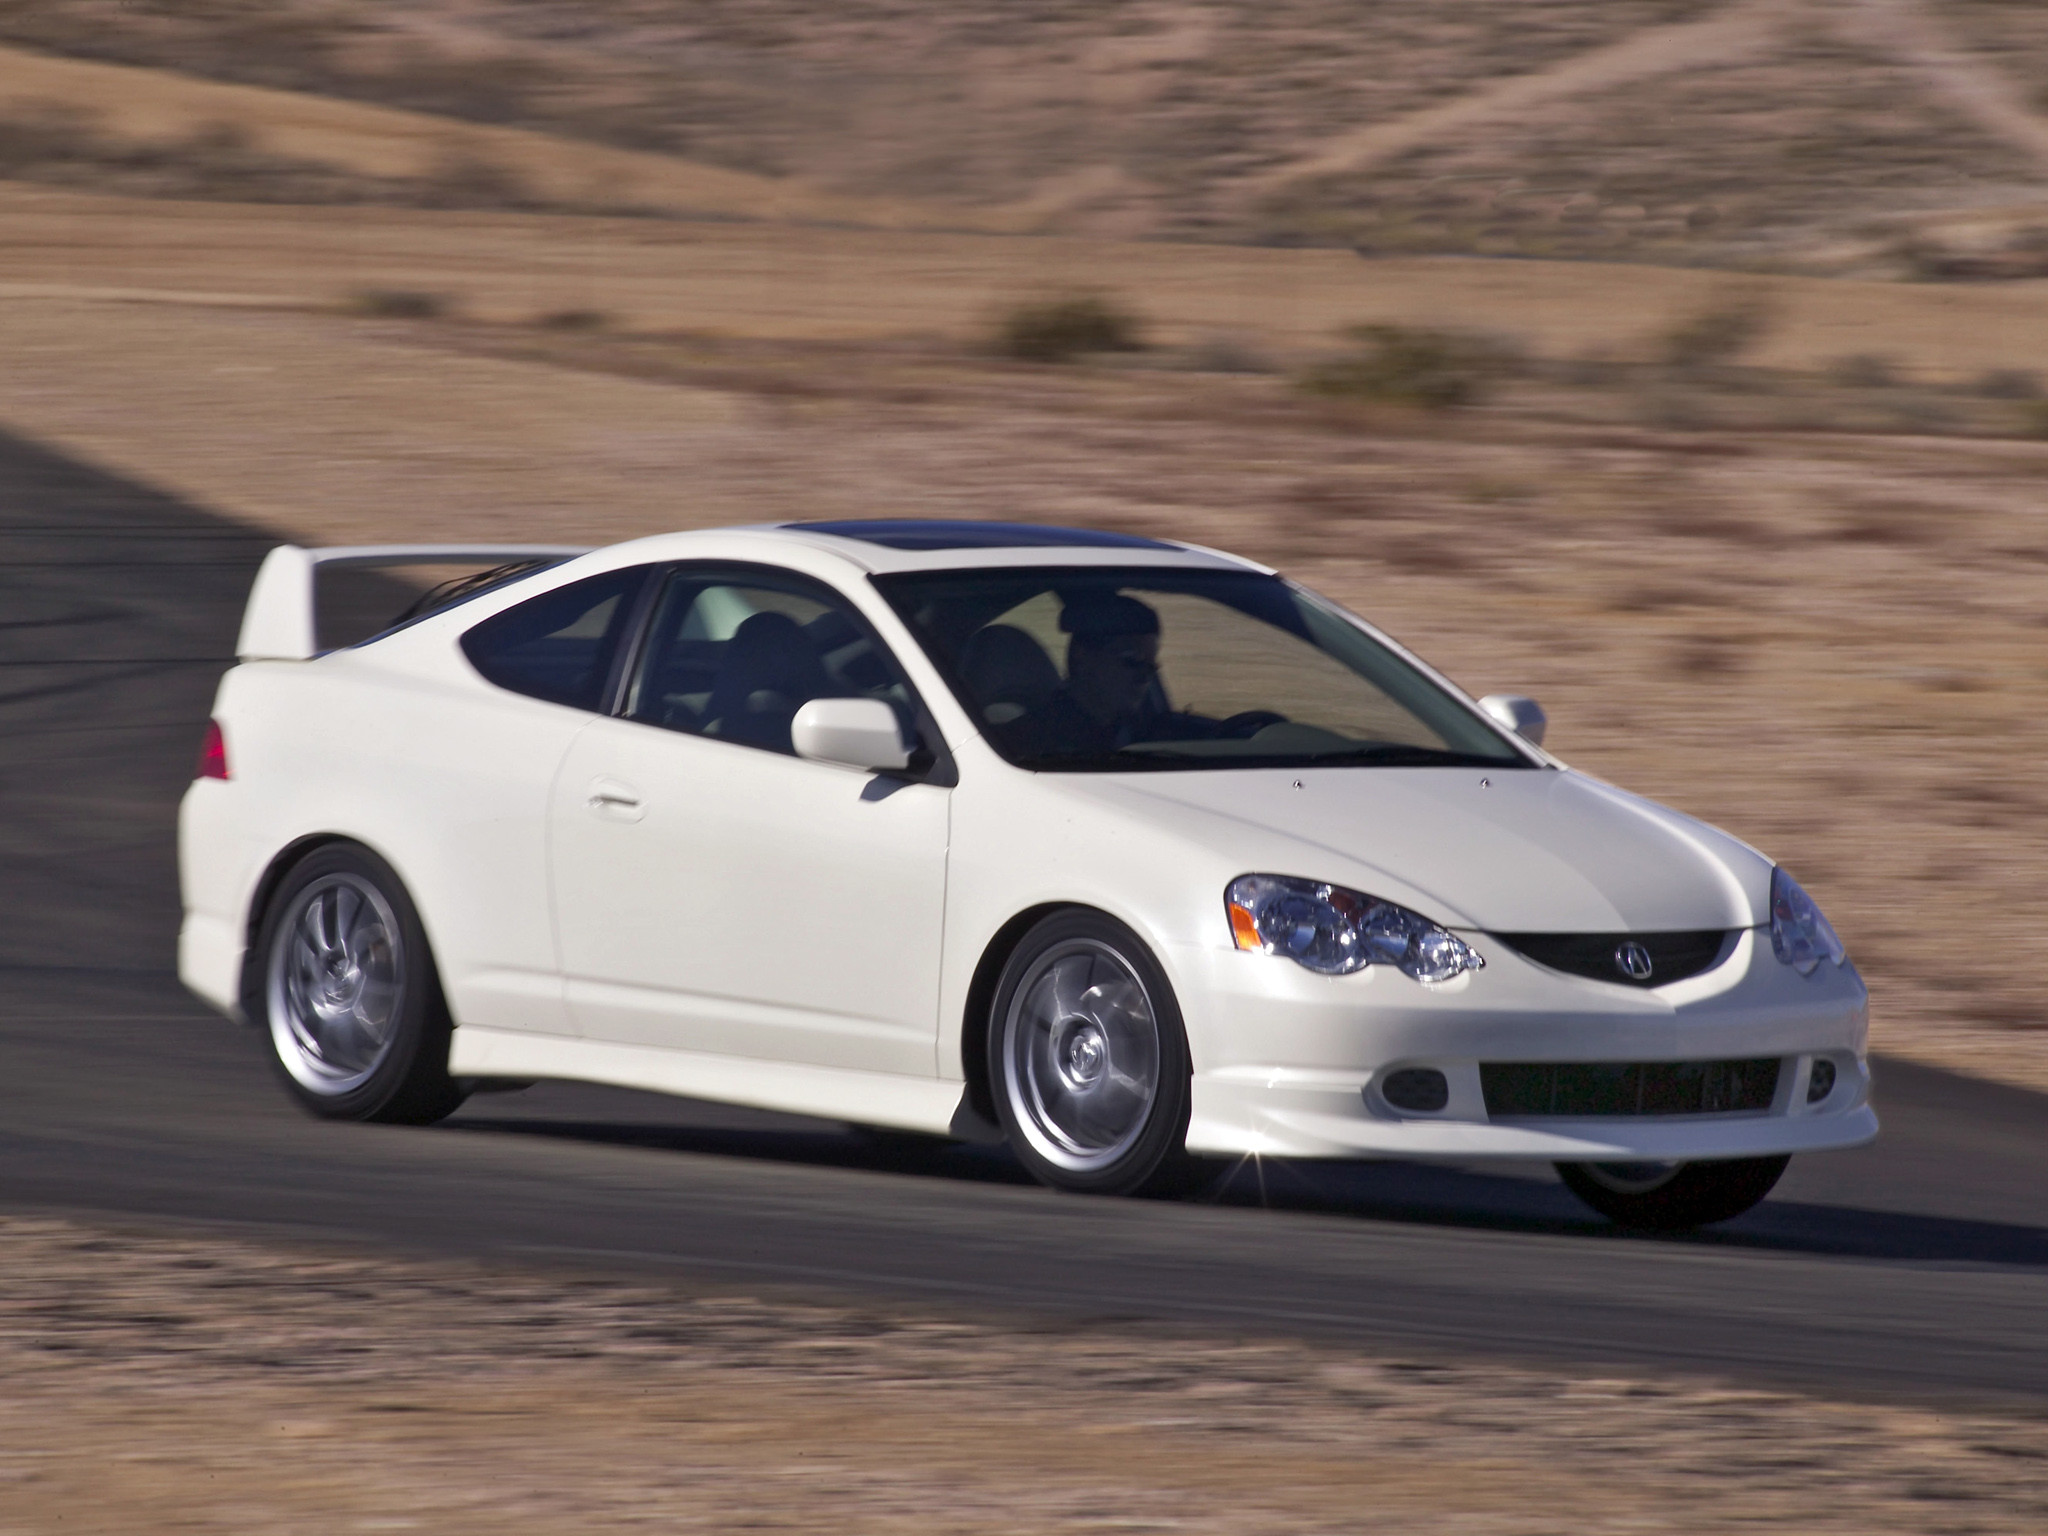 2048x1536 Acura RSX Type S Specs Wallpapers Full HD - http://hdcarwallfx.com/acura-rsx -type-s-specs-wallpapers-full-hd/ | Cool Car Wallpapers | Pinterest |  Honda, ...